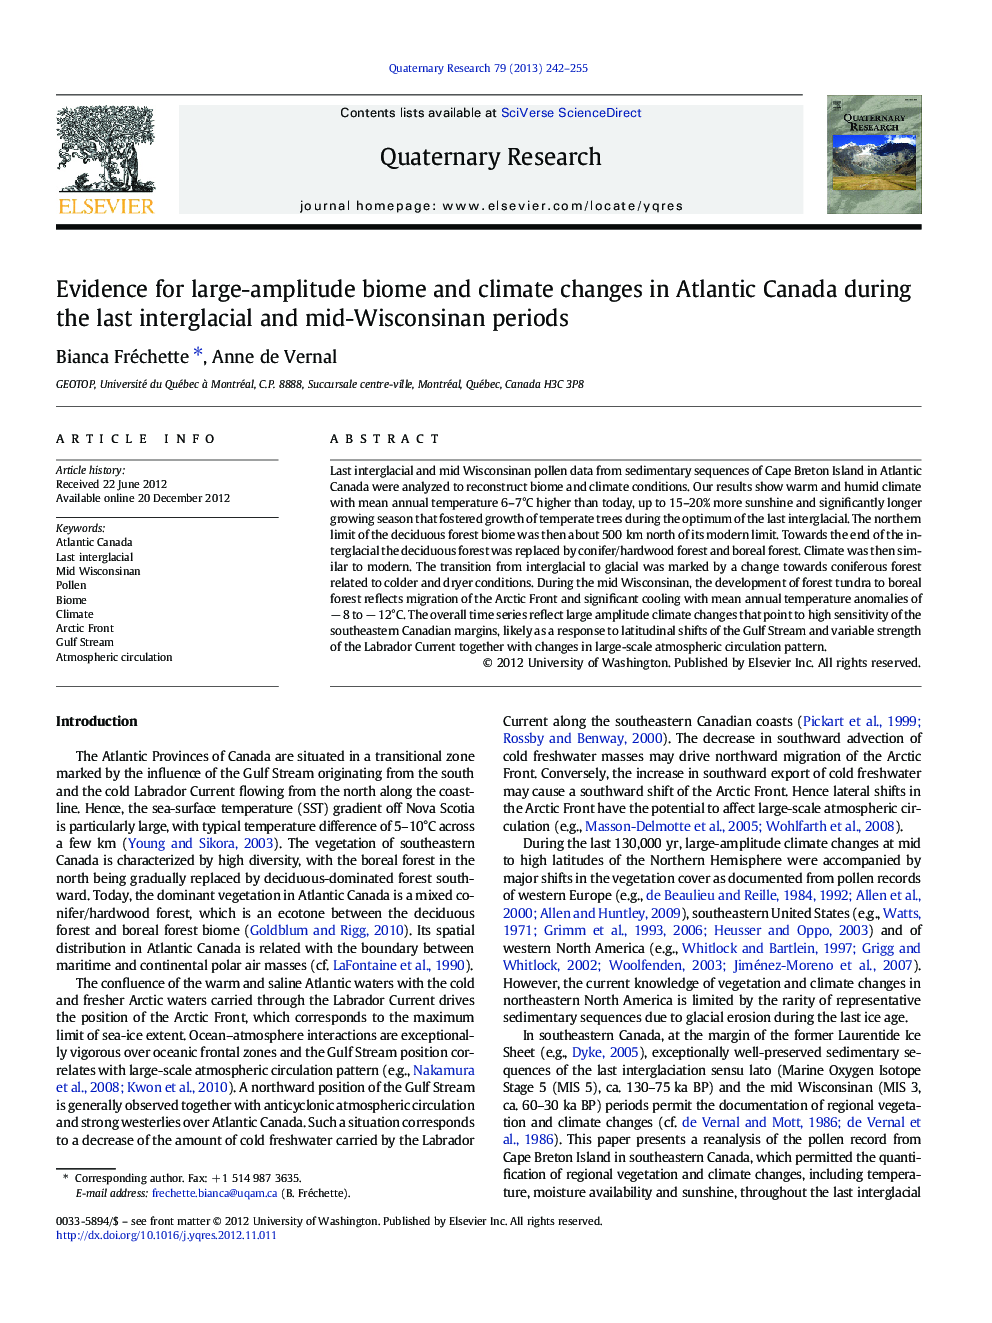 Evidence for large-amplitude biome and climate changes in Atlantic Canada during the last interglacial and mid-Wisconsinan periods